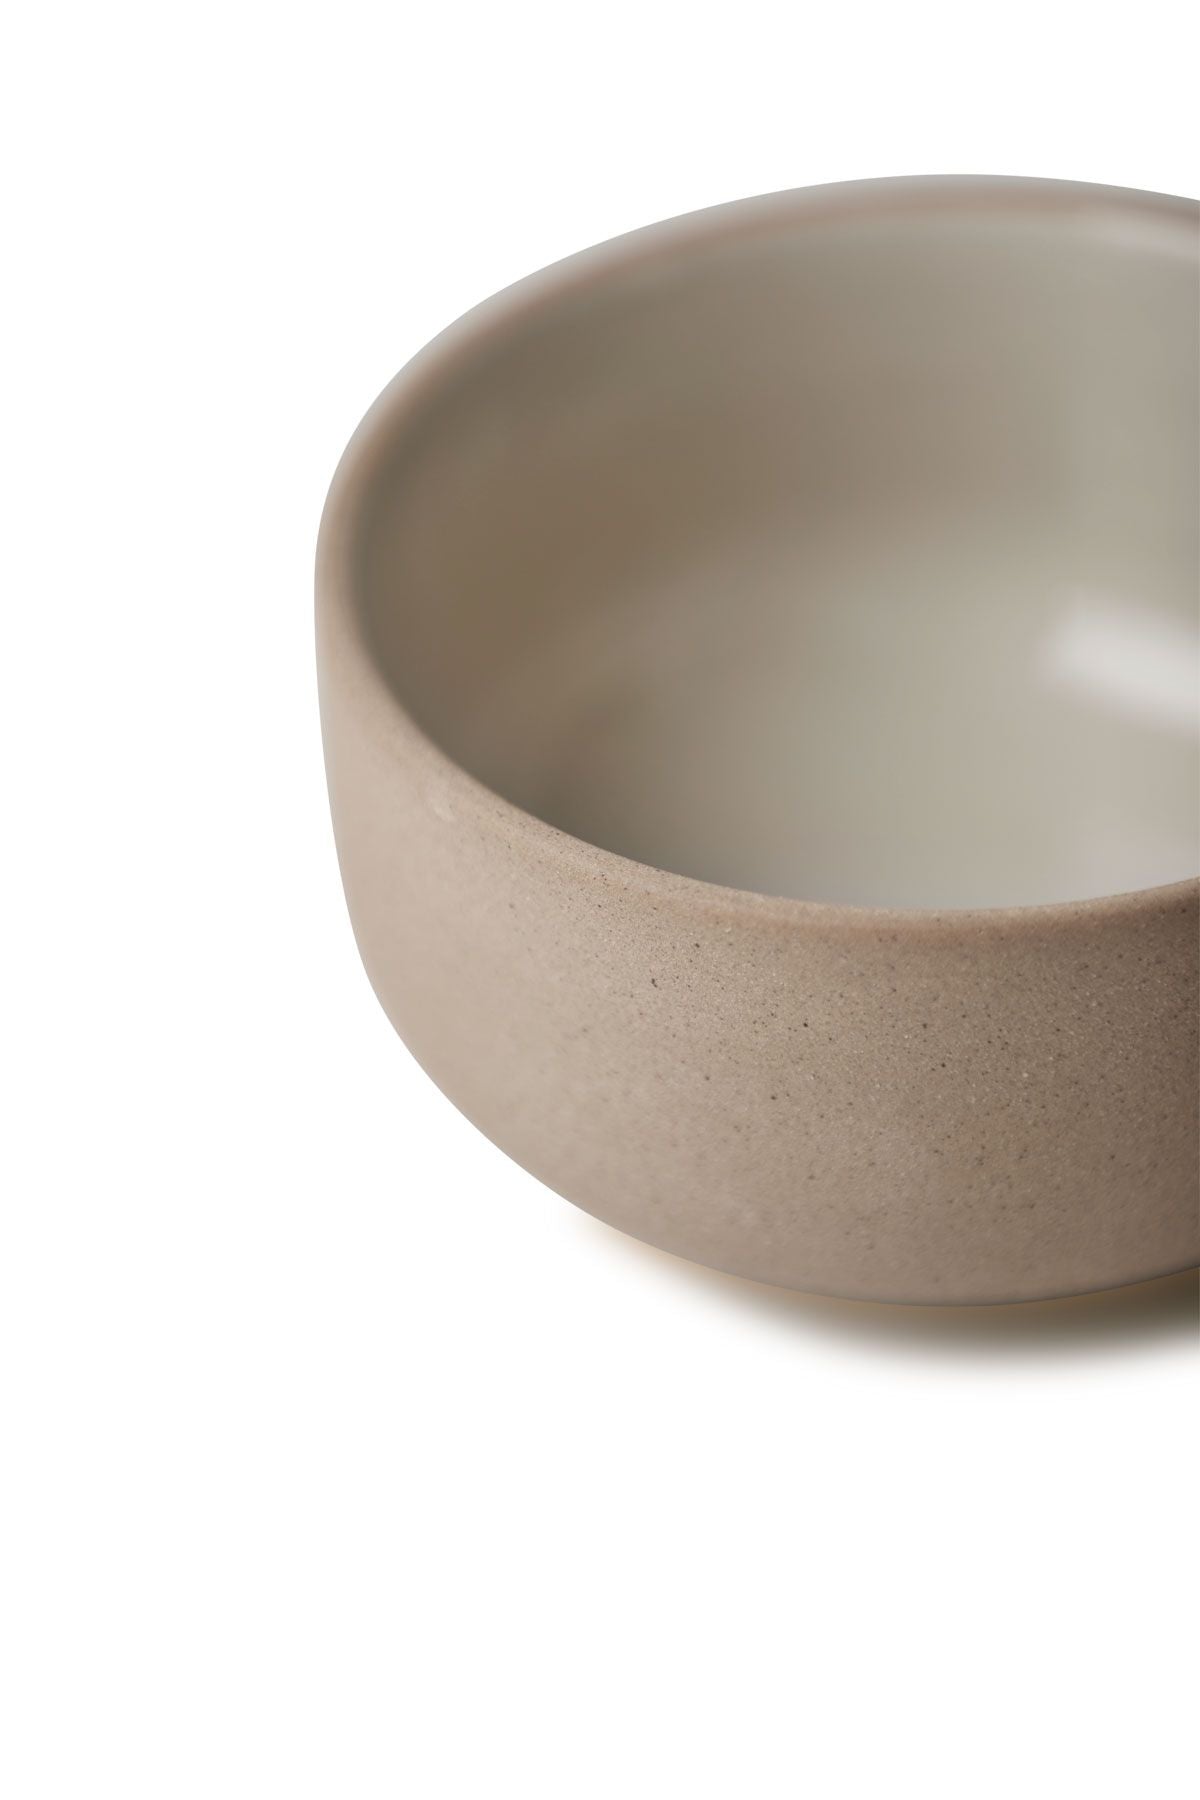 Studio About Clayware Set Of 2 Bowls, Sand/Grey